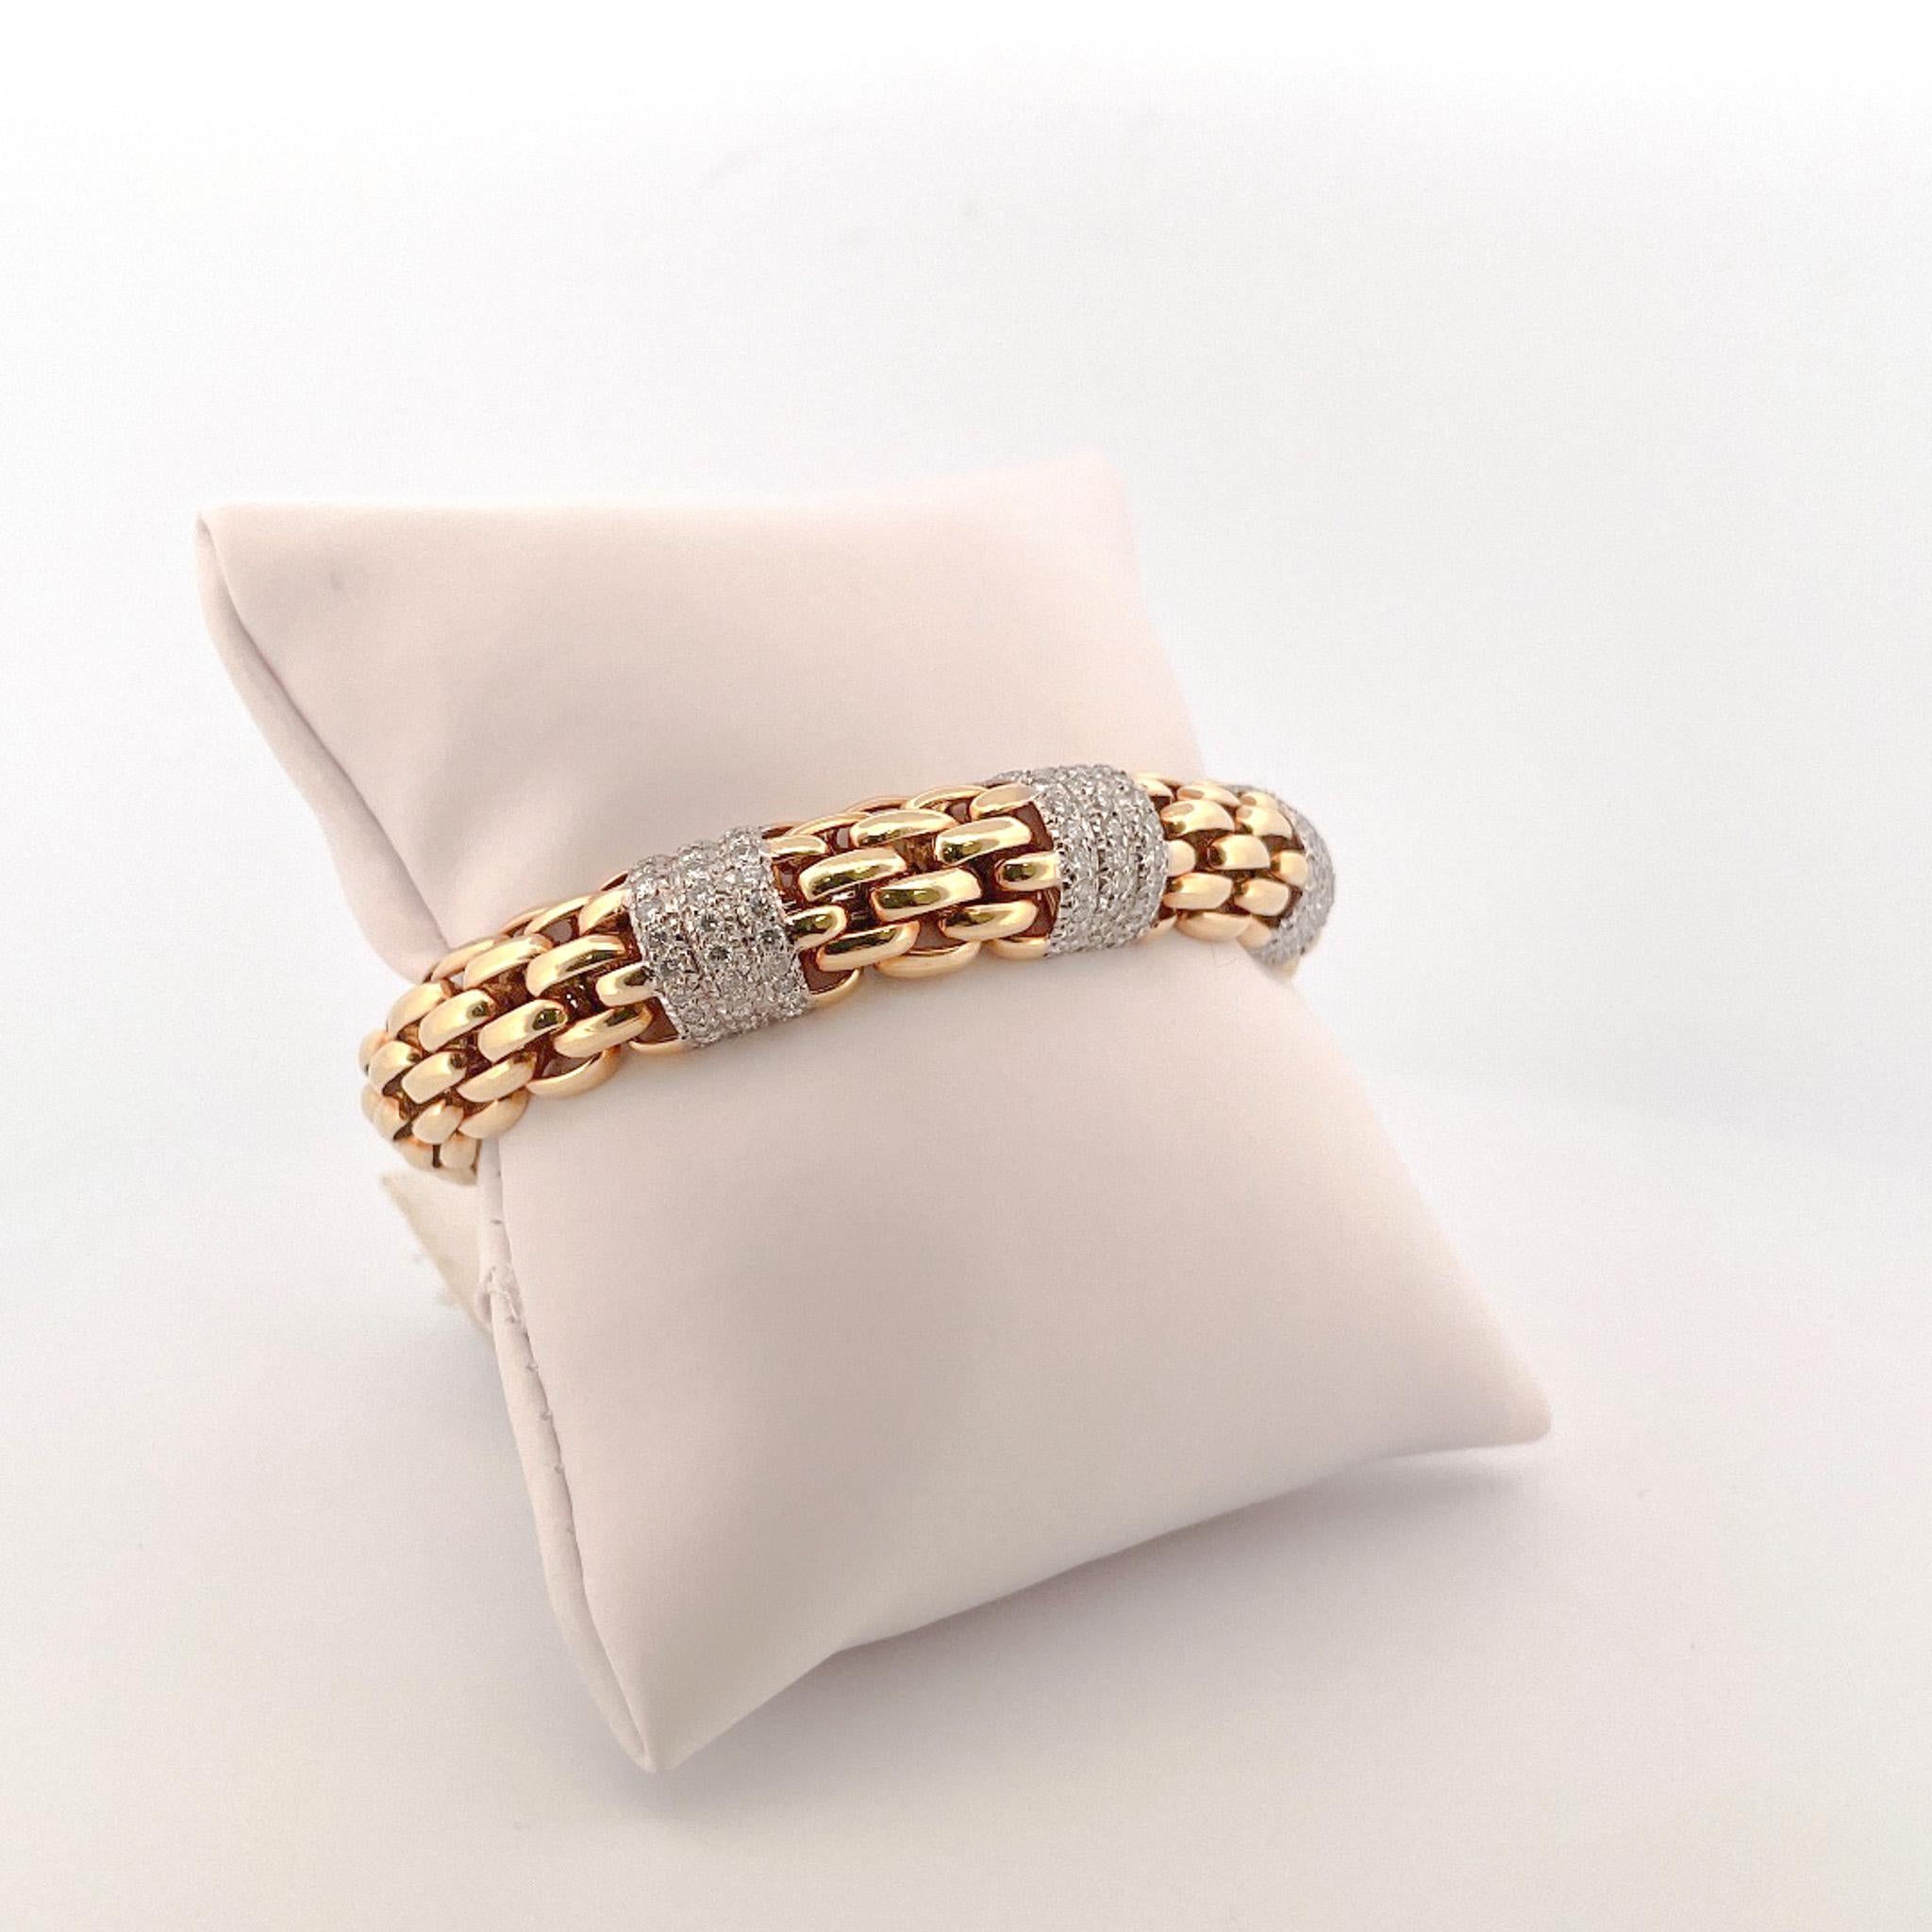 From the Eiseman Estate Jewelry Collection, 18 karat yellow gold diamond woven link cuff bracelet. This bracelet is crafted with 108 pave diamonds with a combined total weight of 2.00 carats. These diamonds are set in rows of 3 along 3 stations. 